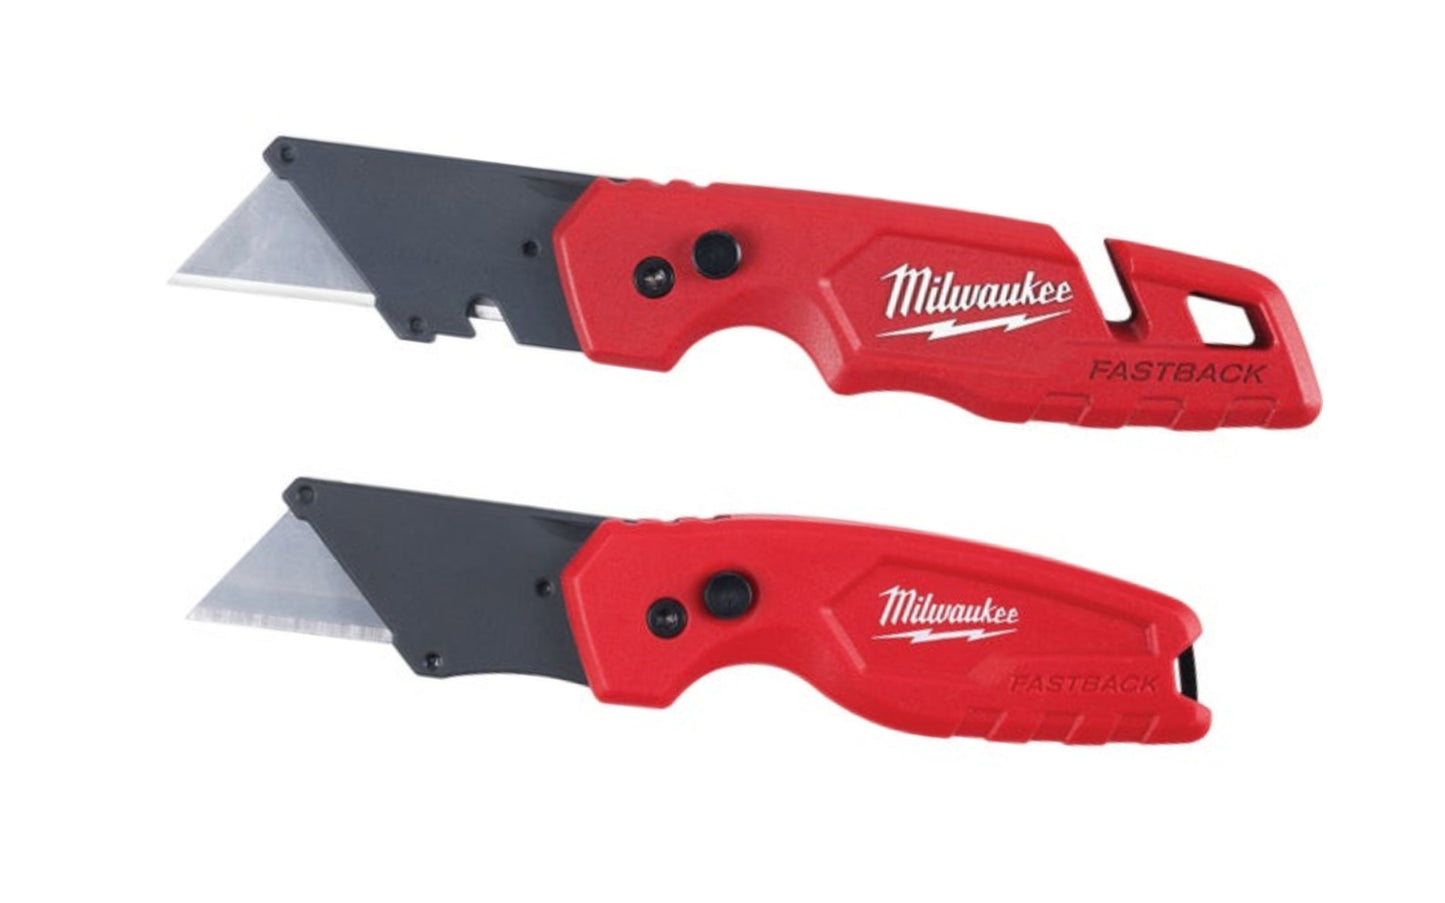 Milwaukee "Fastback" Folding Utility Knife - 2 Pack. Milwaukee's "Fastback" Folding Utility Knife features Press and Flip, a one-handed blade opening for easy activation. Features a magnetic blade storage that holds five blades and folds into the knife body ~ 48-22-1503. 045242534425